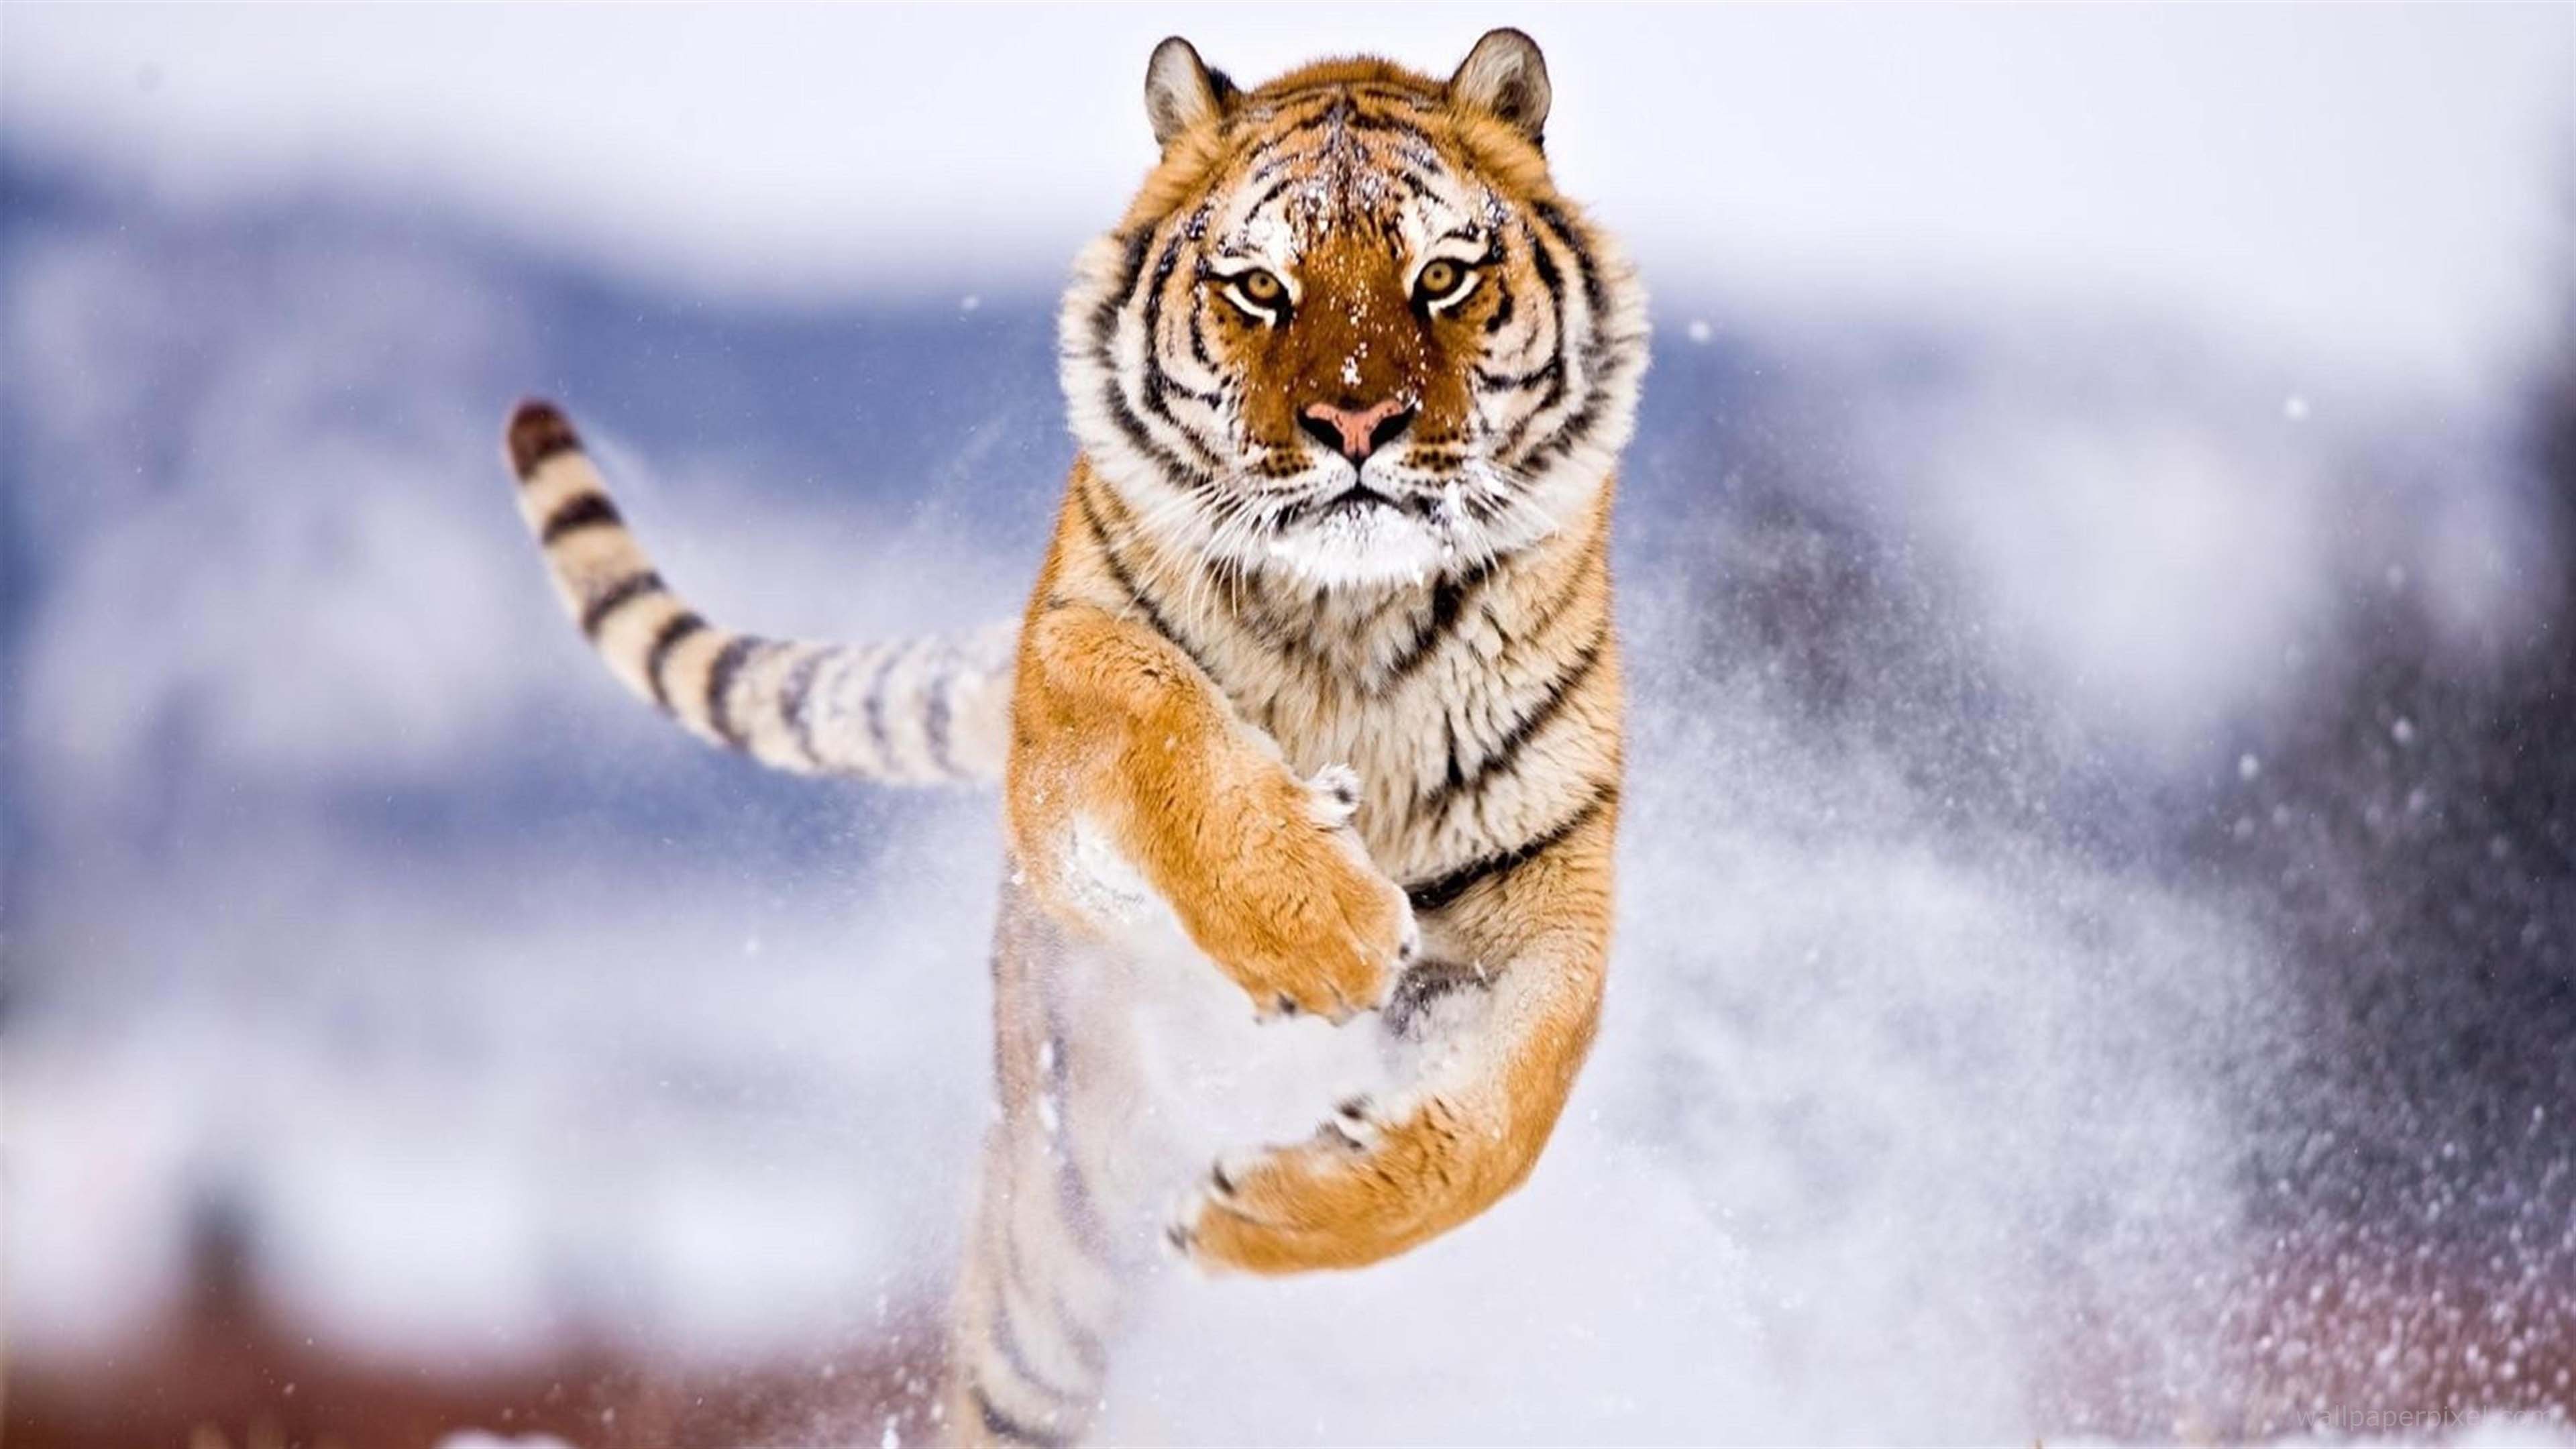 Hd wallpapers of majestic animals from around the globe